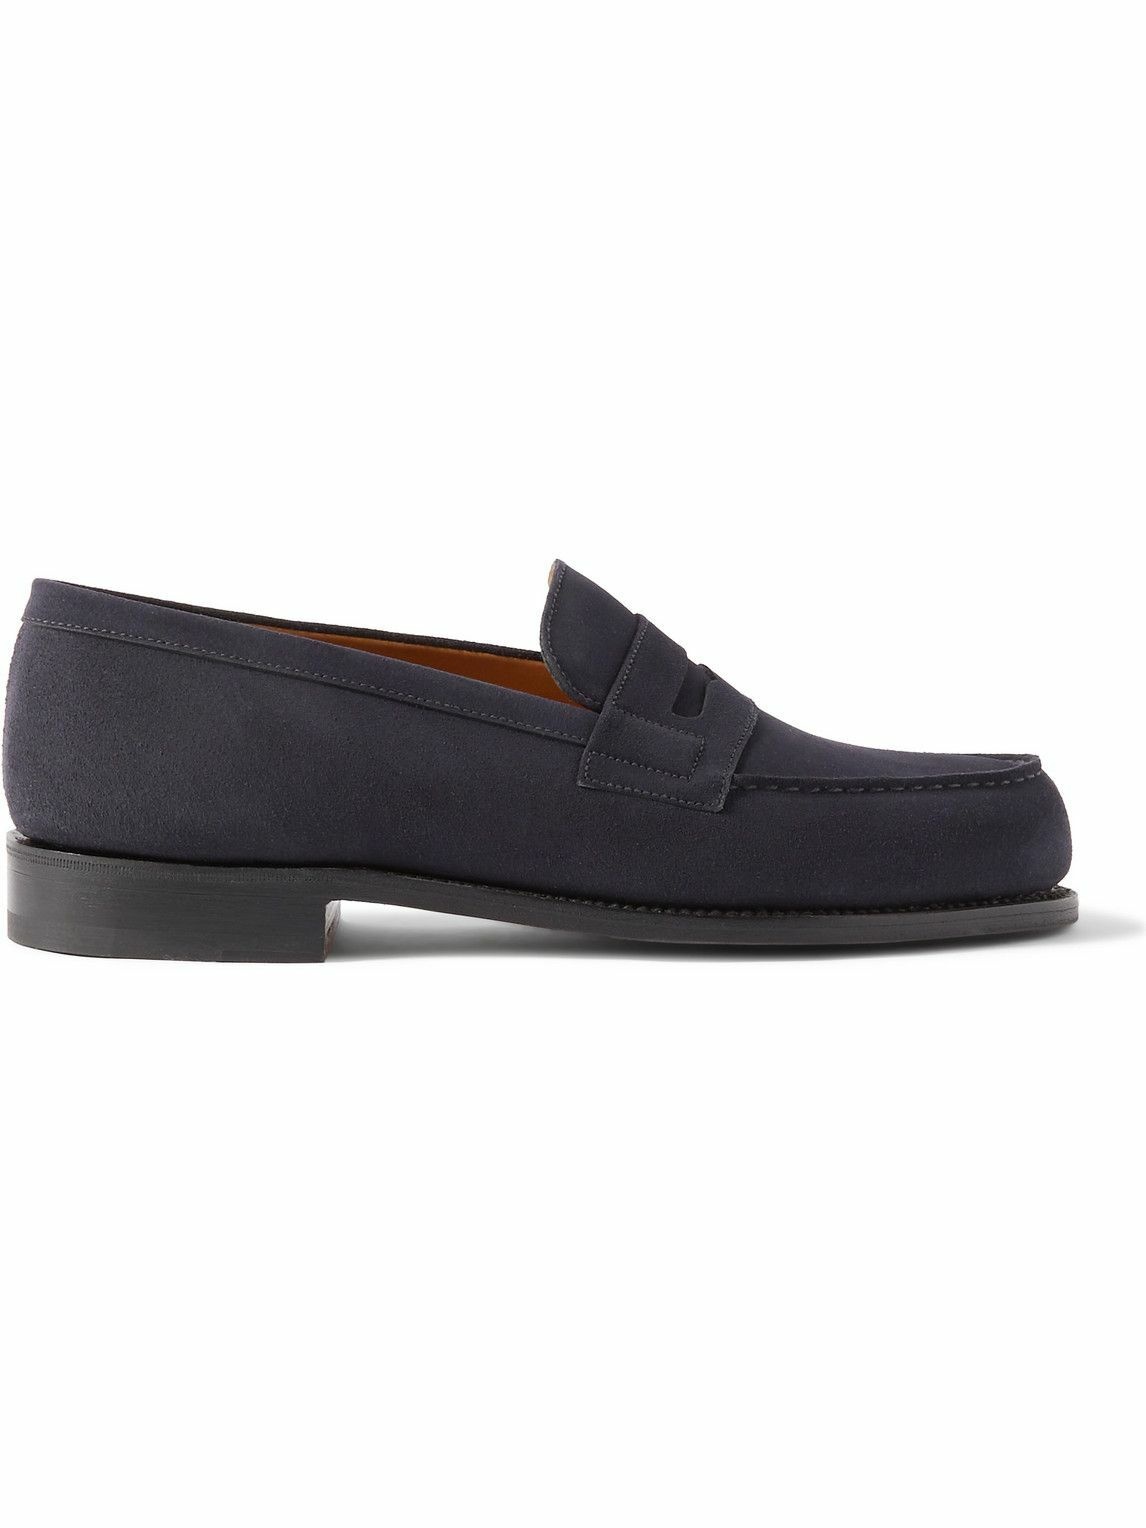 Photo: J.M. Weston - 180 Moccasin Suede Penny Loafers - Blue